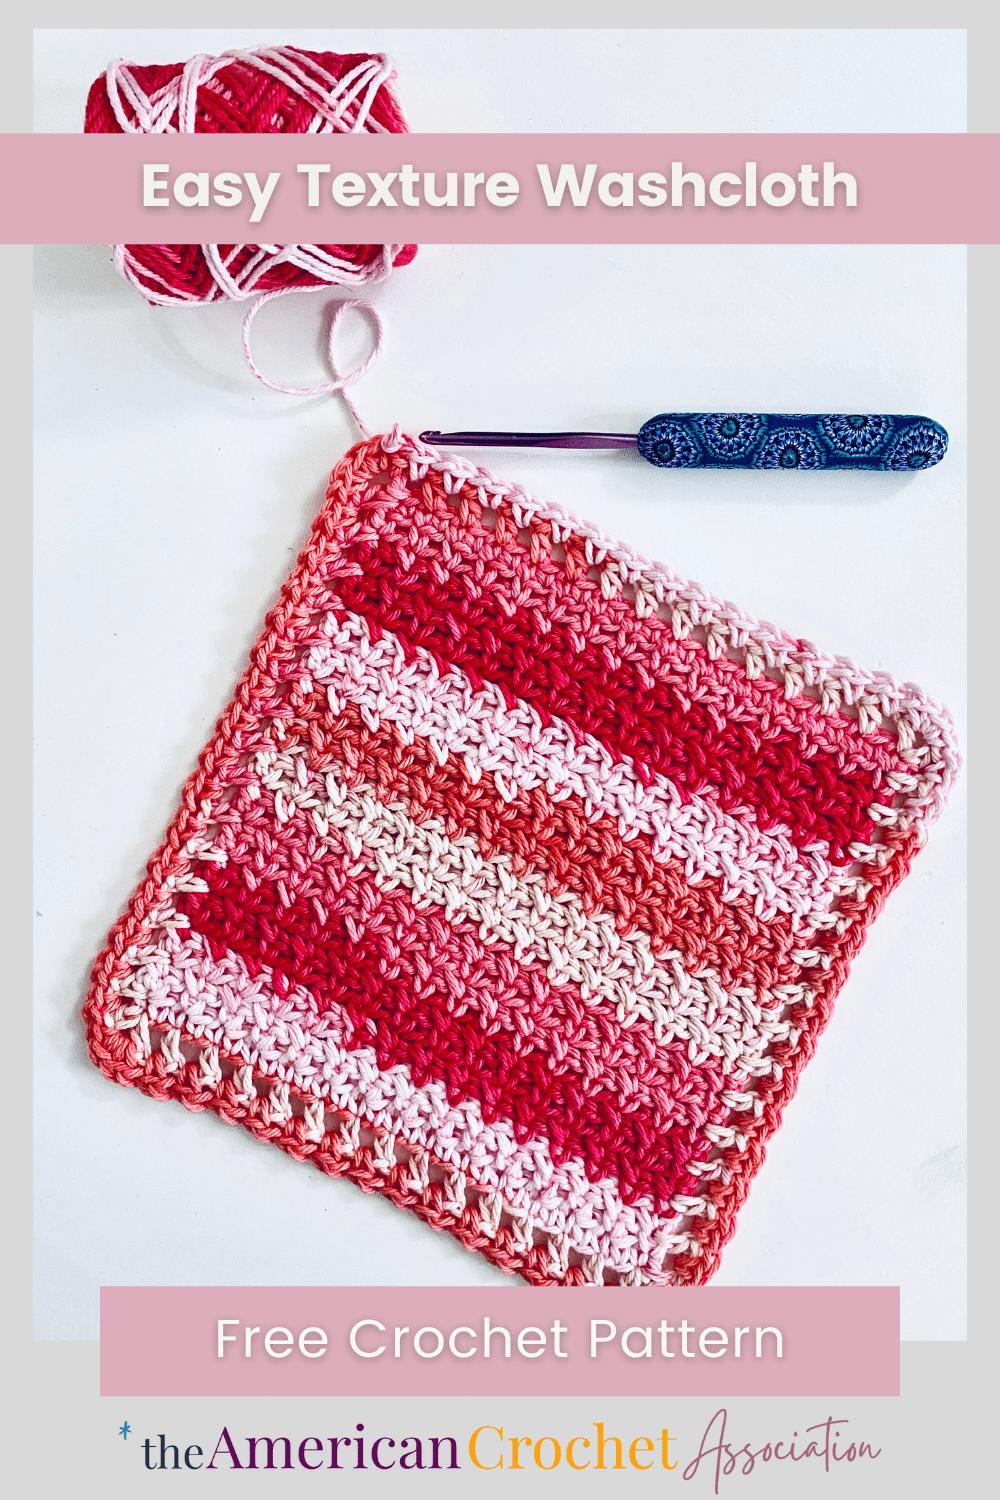 multi-colored texture washcloth with crochet hook